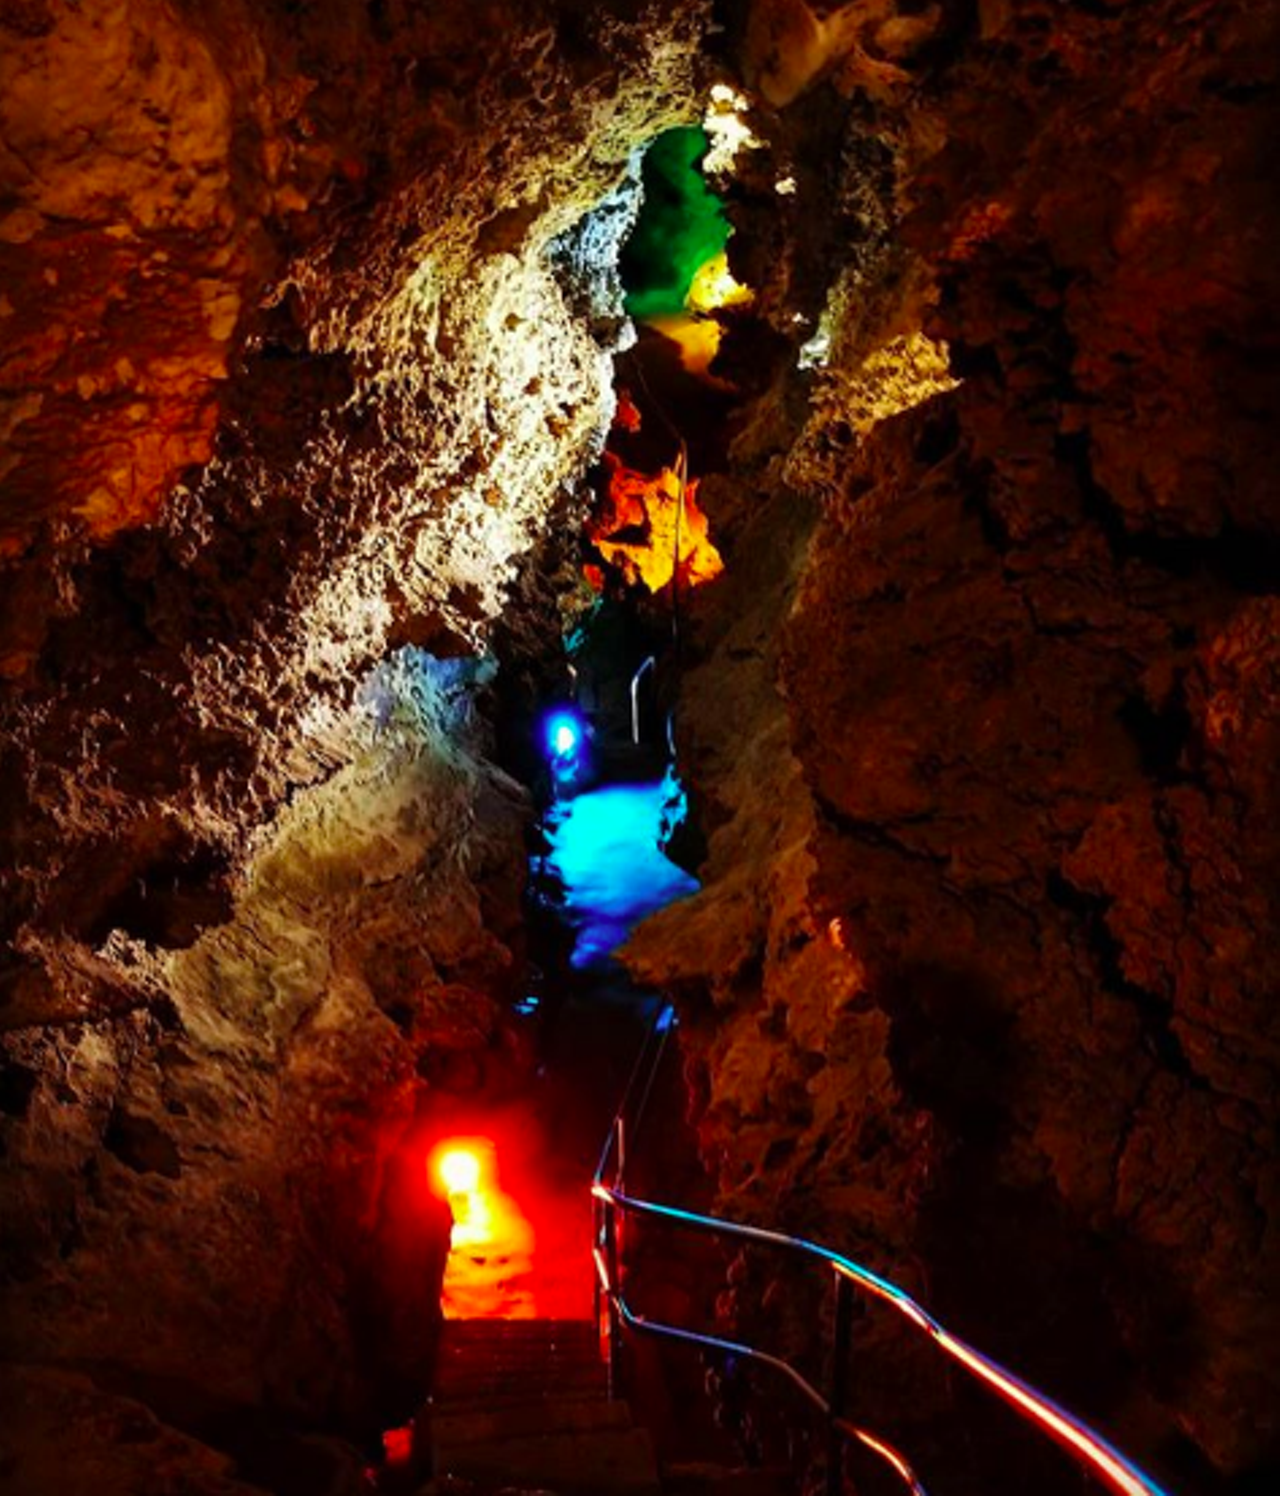 Be amazed at Wonder World Park
1000 Prospect St, San Marcos, (512) 392-3760, wonderworldpark.com
This one-of-a-kind theme park is perfect for a new getaway with the fam. Known as the first show cave in Texas, WWP lets you explore the Balcones Fault Line Cave and plenty of other attractions the kiddos will be entertained by for hours. The park takes pride in being home to “the nation’s only true example of an earthquake-formed cave” so book a tour and prepare to be wowed.
Photo via Instagram / shanekourt